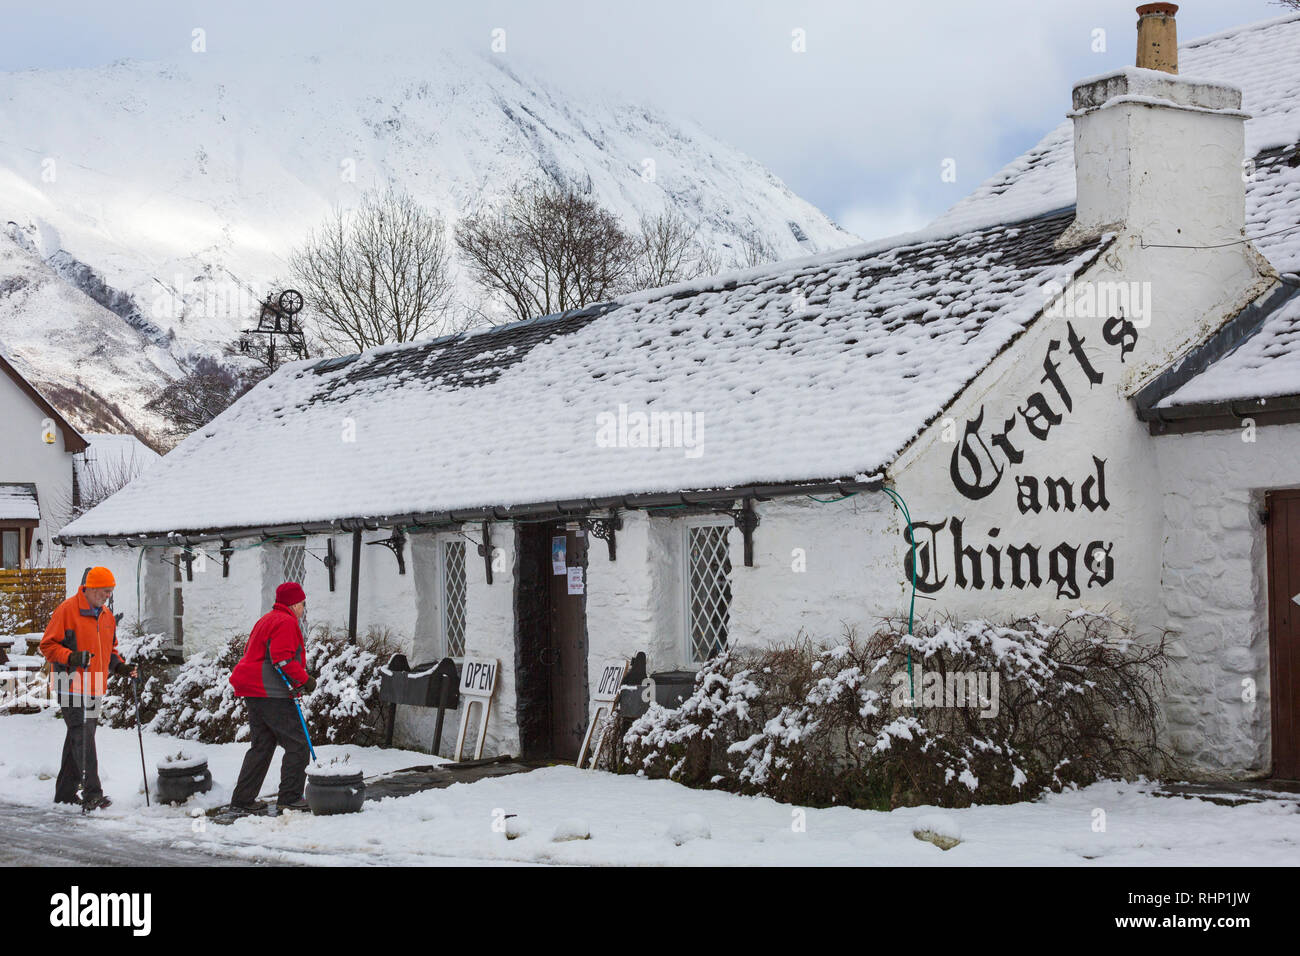 Walkers head for Crafts and Things shop and café covered in snow on a cold winters day at Glencoe Village, Highlands, Scotland in winter Stock Photo